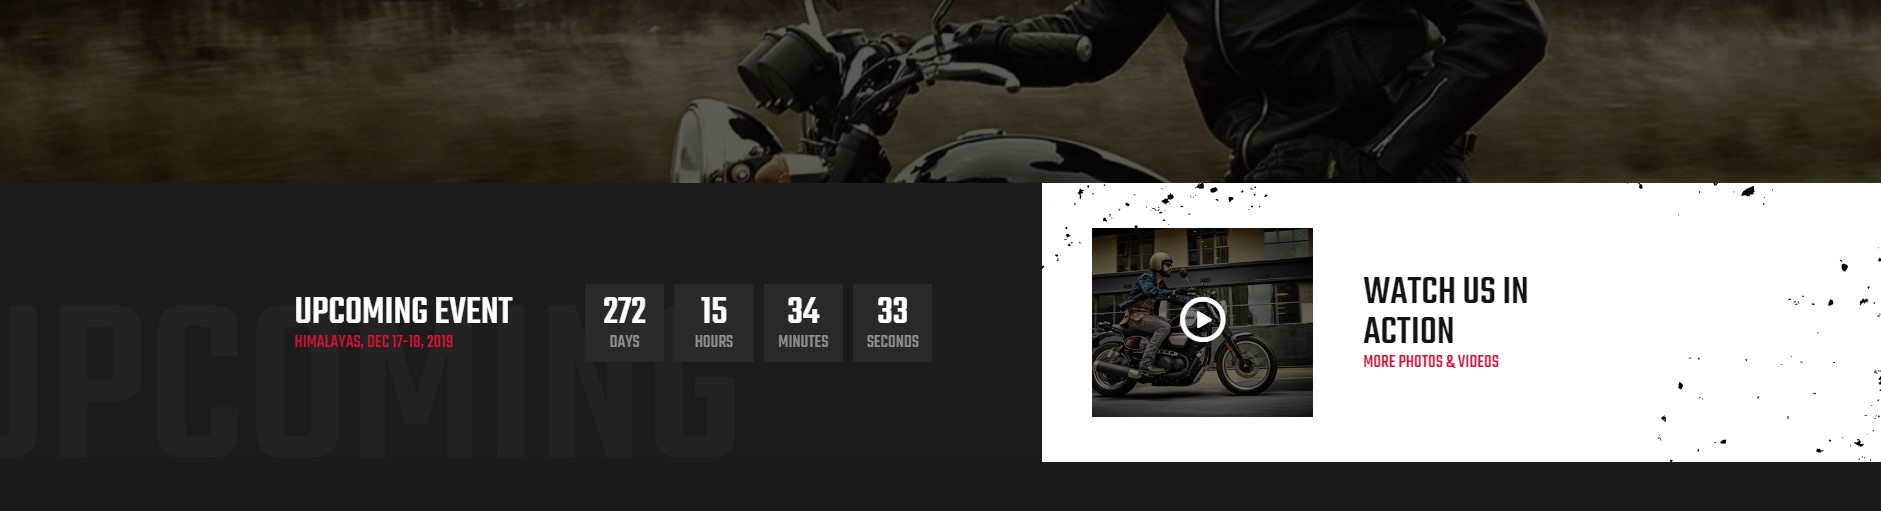 LexRider - best Motorcycle WordPress Theme - Fully Show-off Upcoming Events